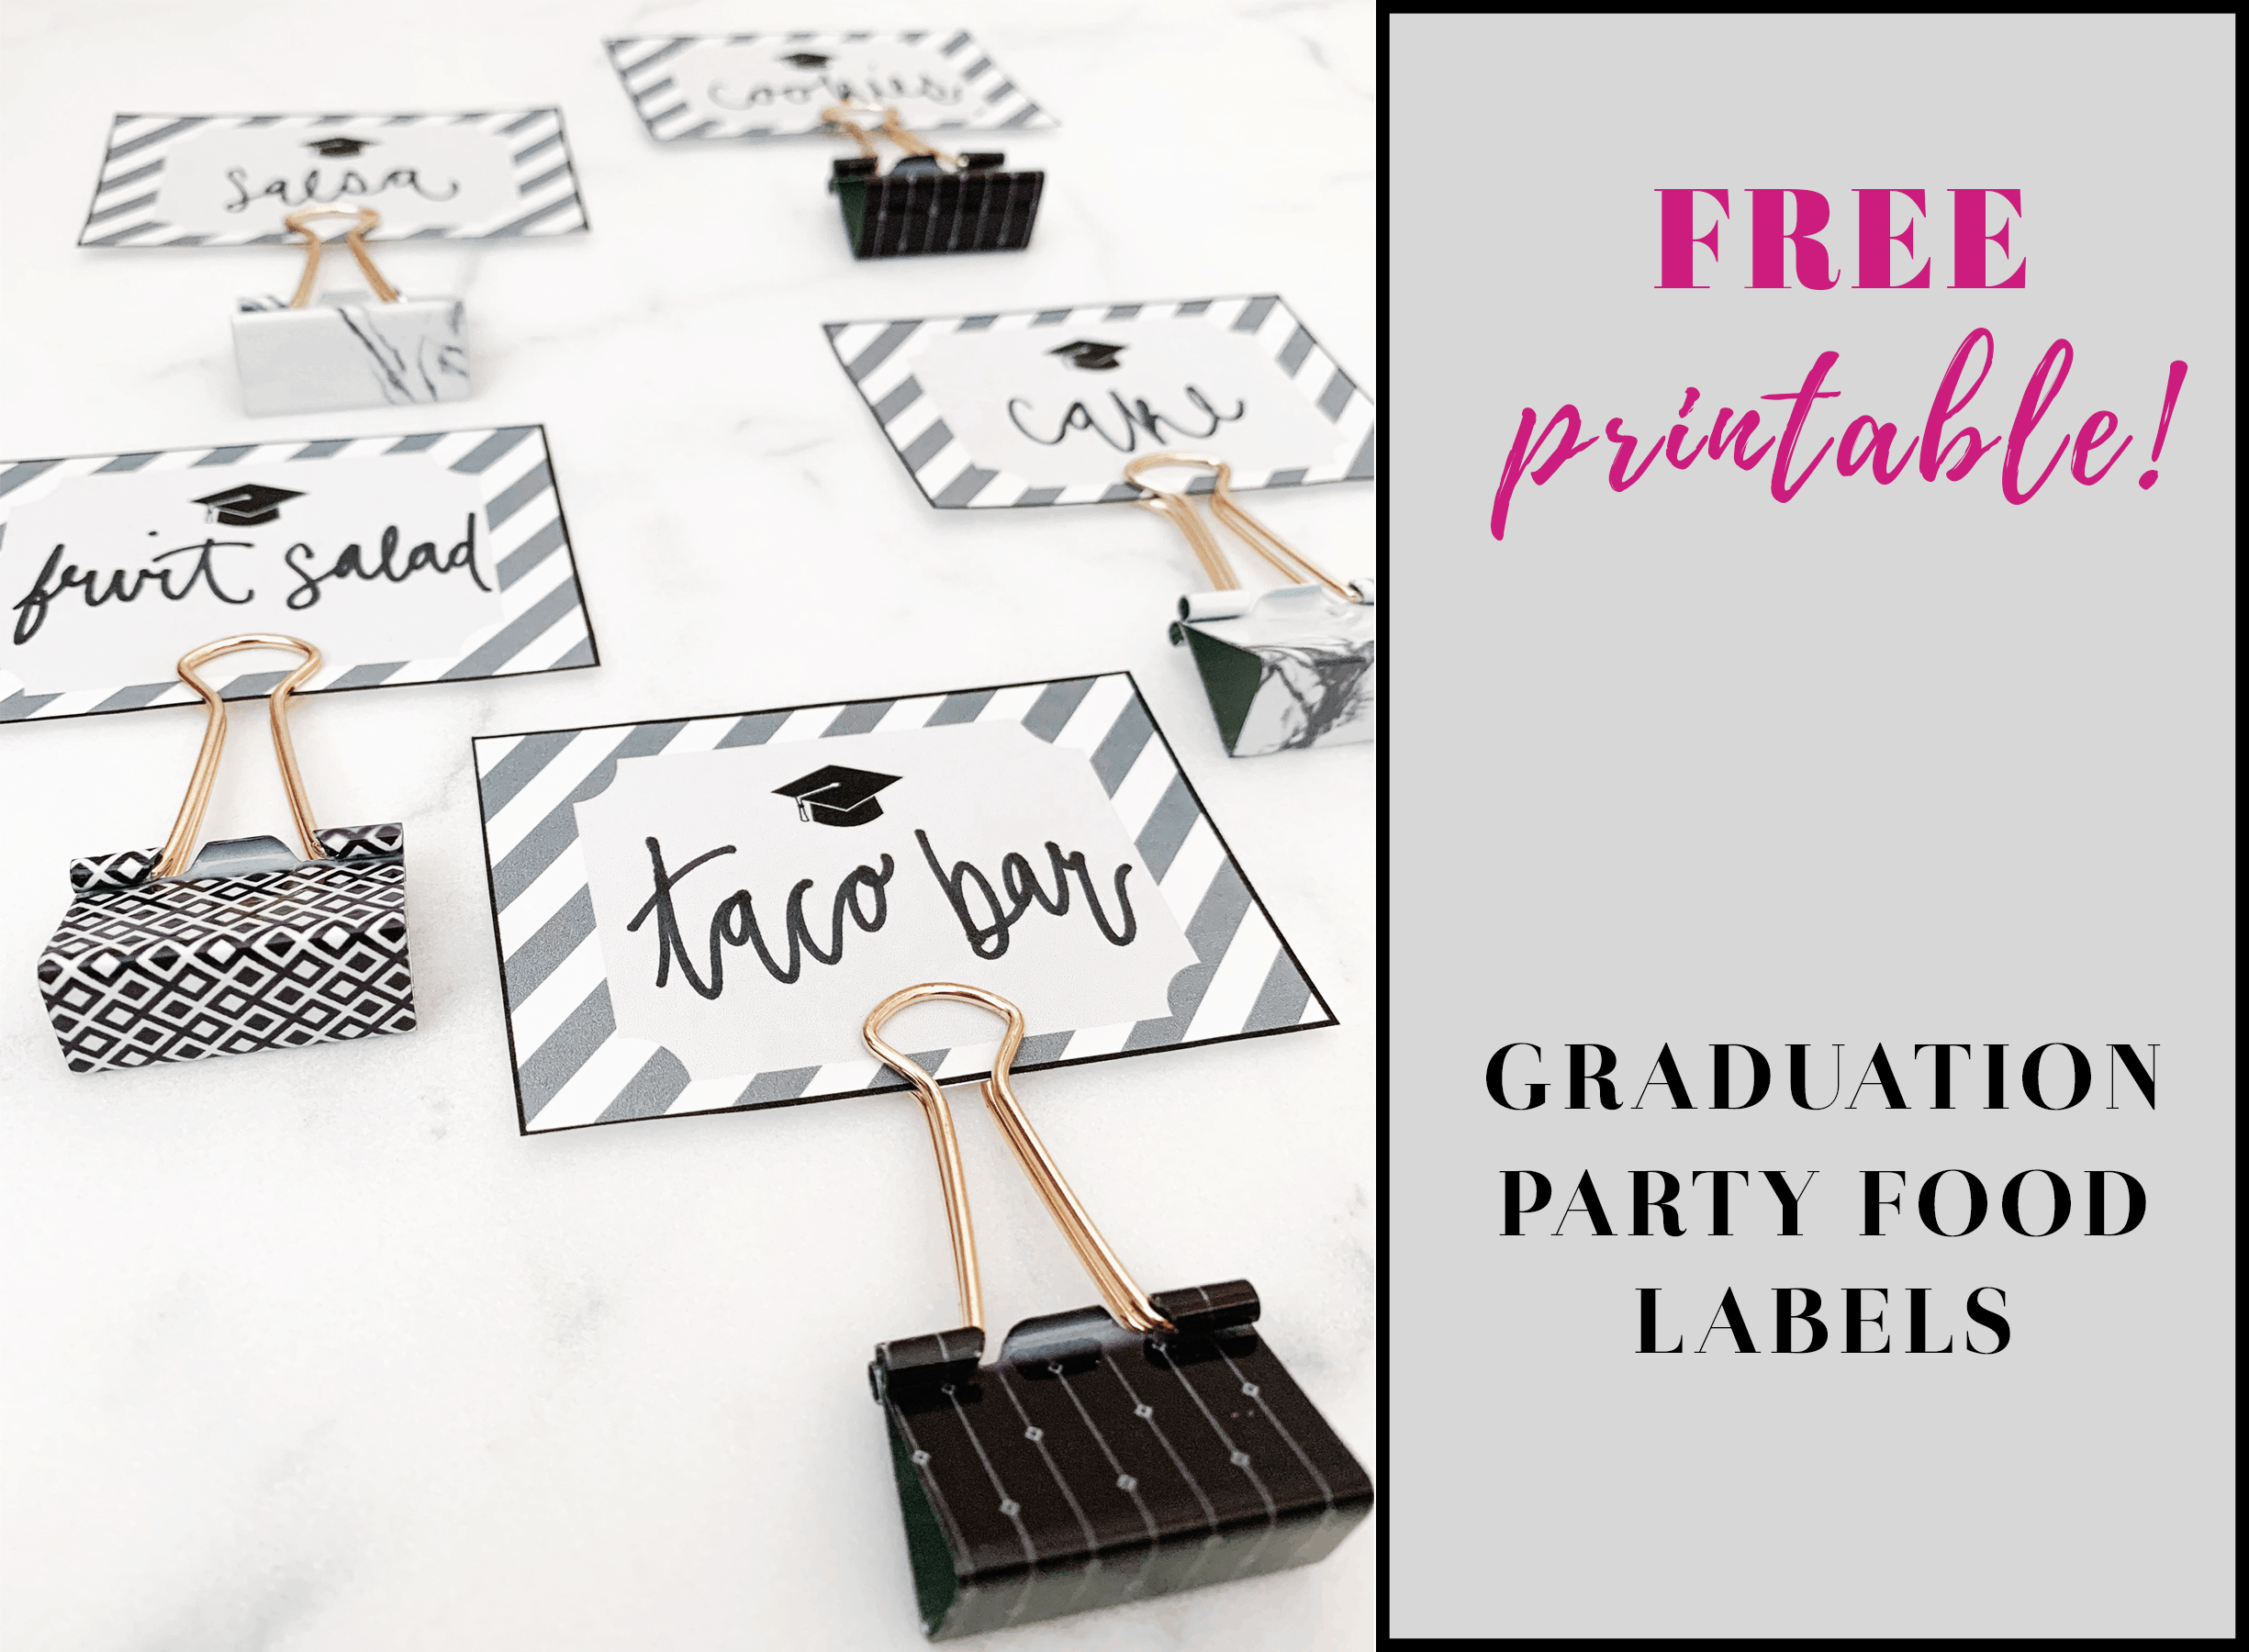 Free Printable Graduation Party Food Labels By Sophia Lee - Free Printable Buffet Food Labels